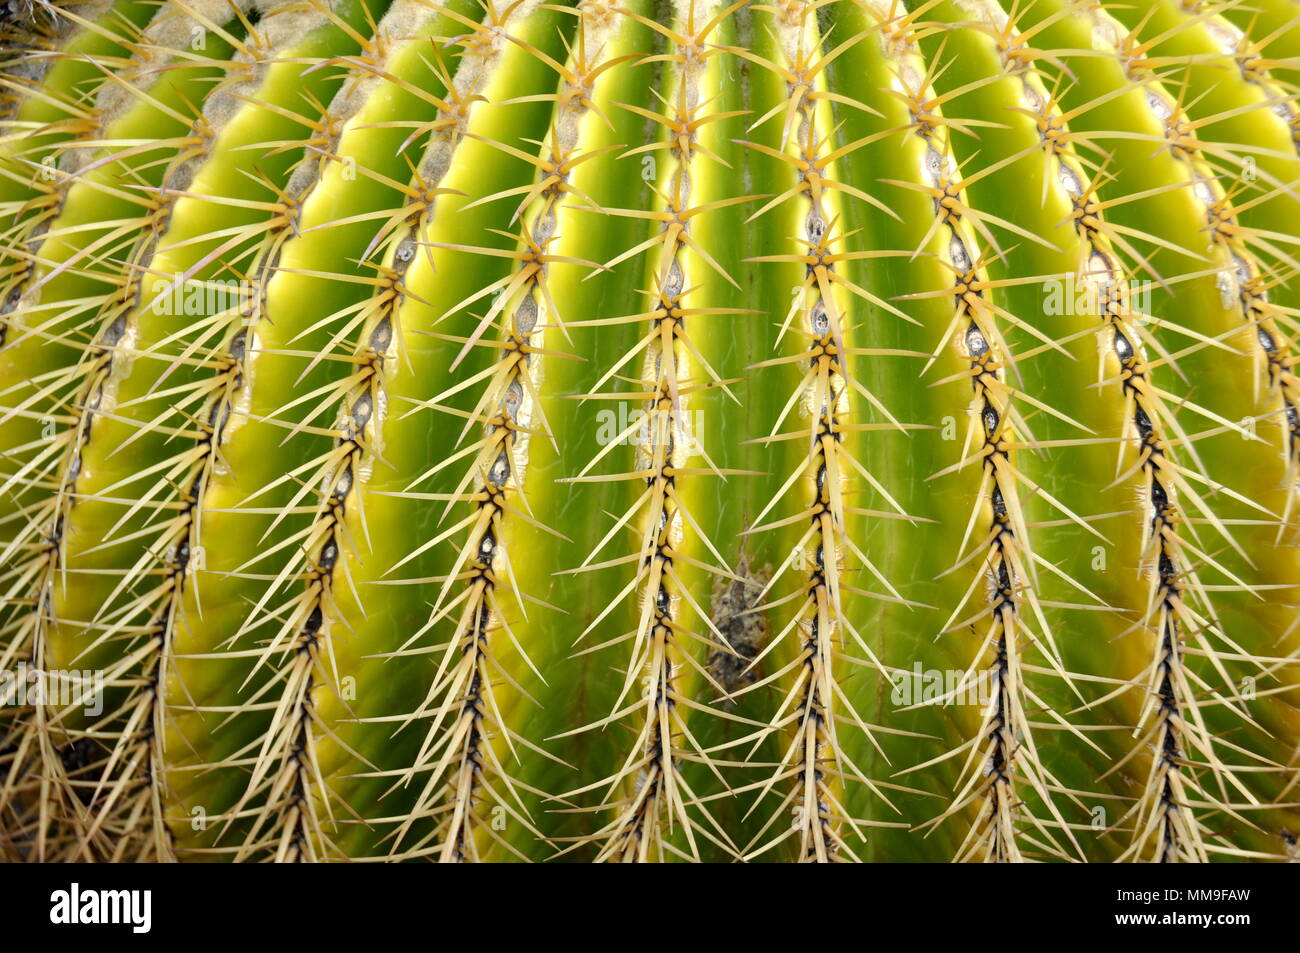 Closeup on the thorns of a cactus plant Stock Photo